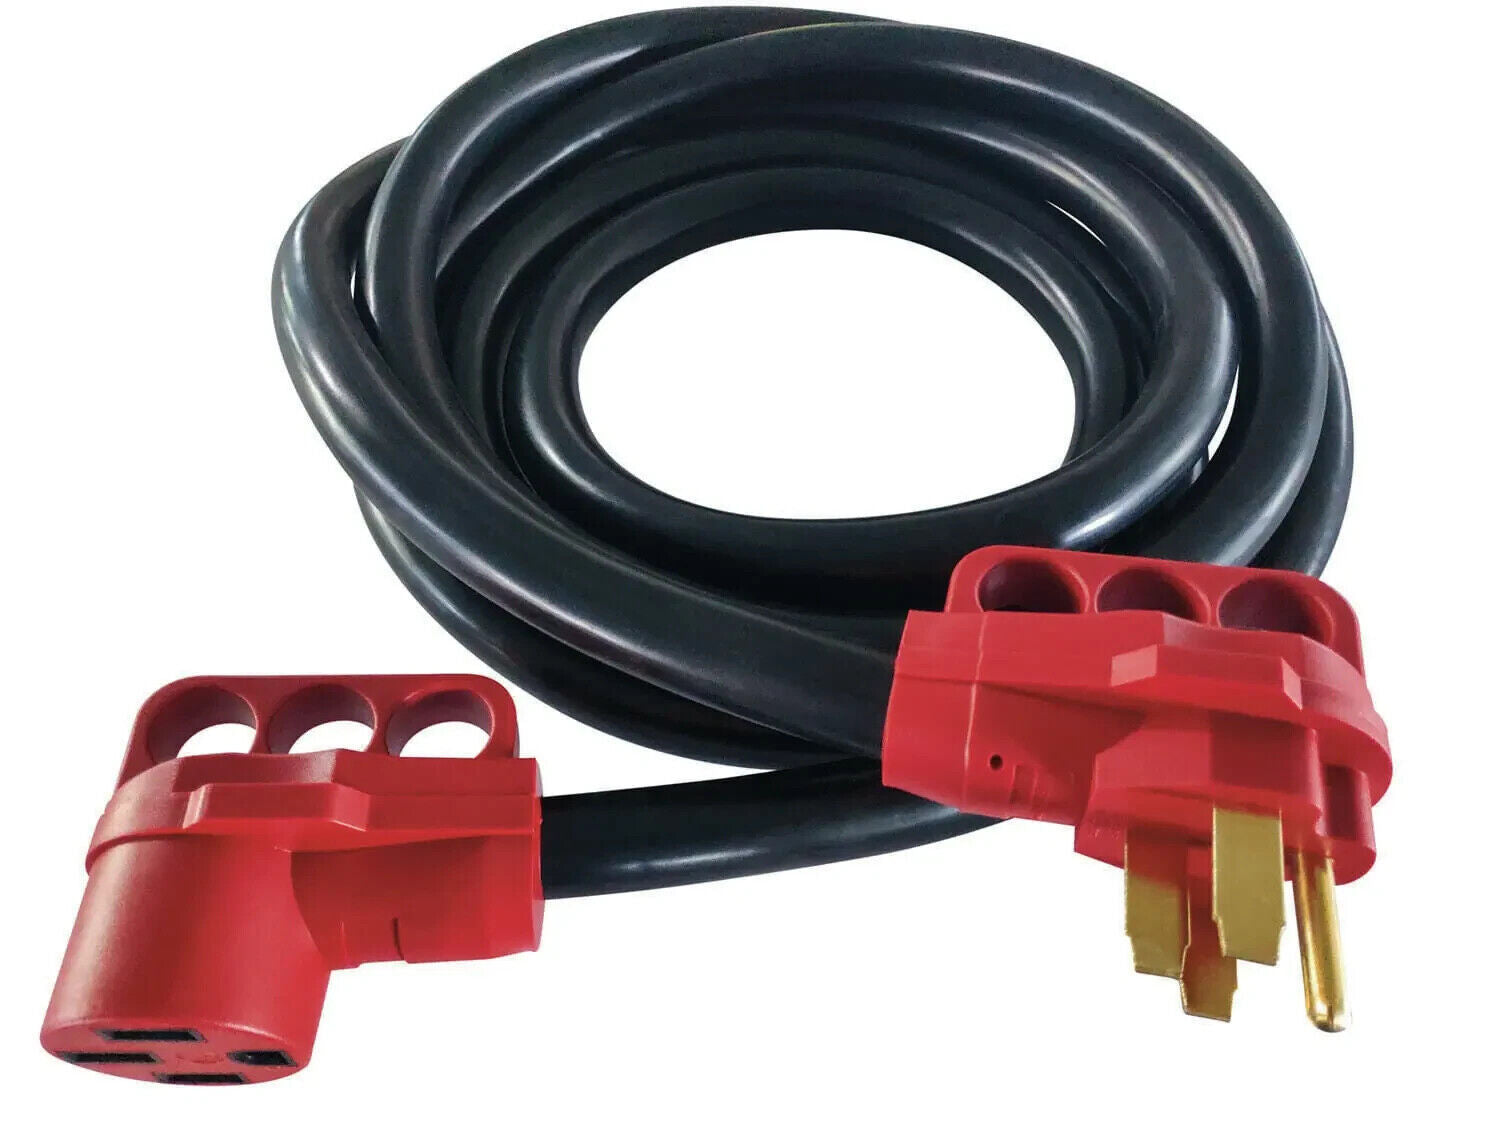 Valterra A10-5025EH 25' Mighty Cord 50Amp Extension Cord with Handle